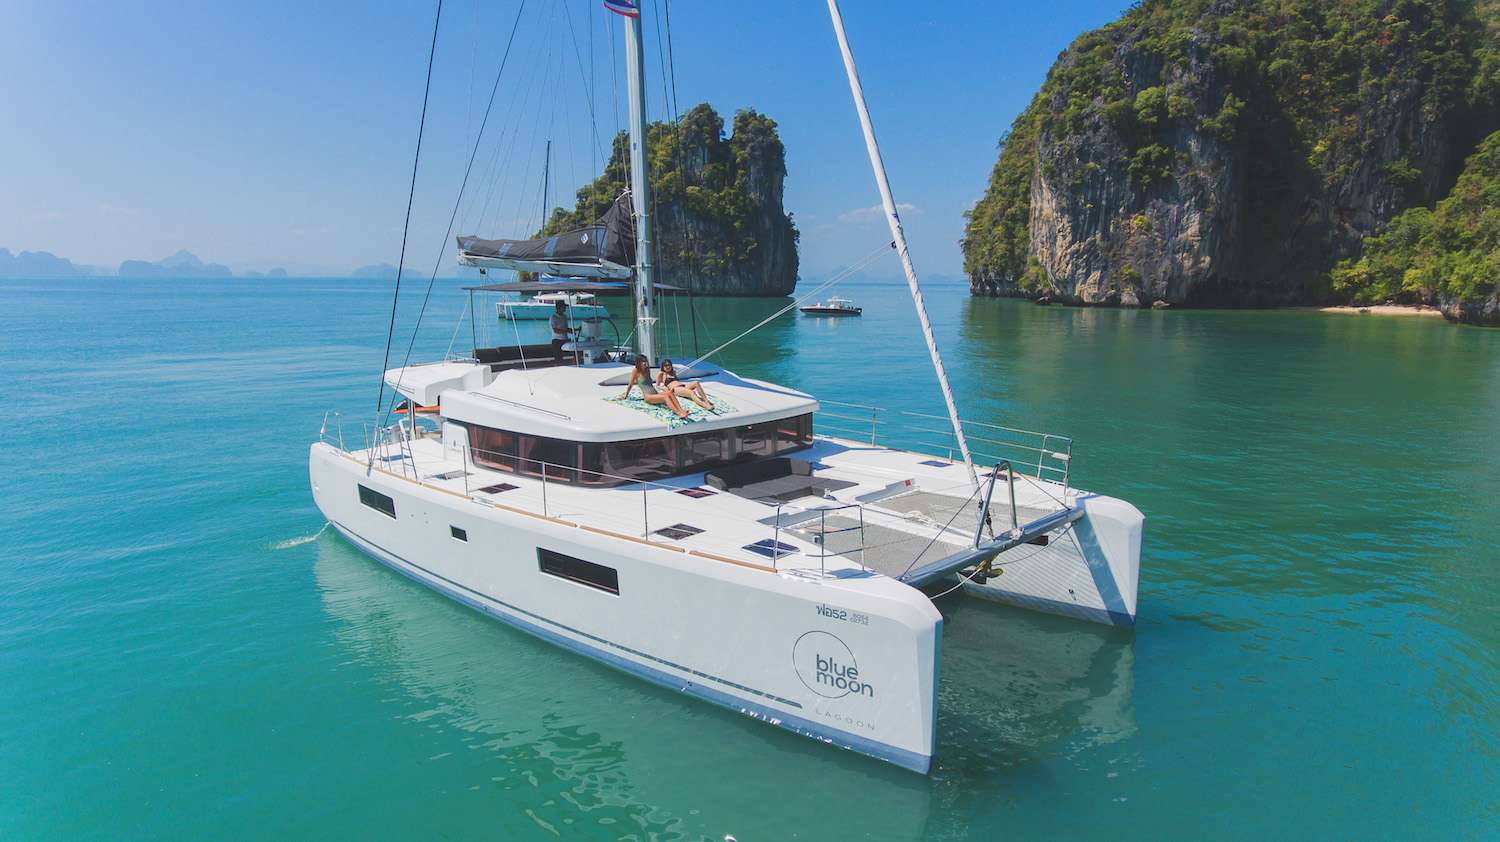 blue moon - Yacht Charter Langkawi & Boat hire in Indian Ocean & SE Asia 2